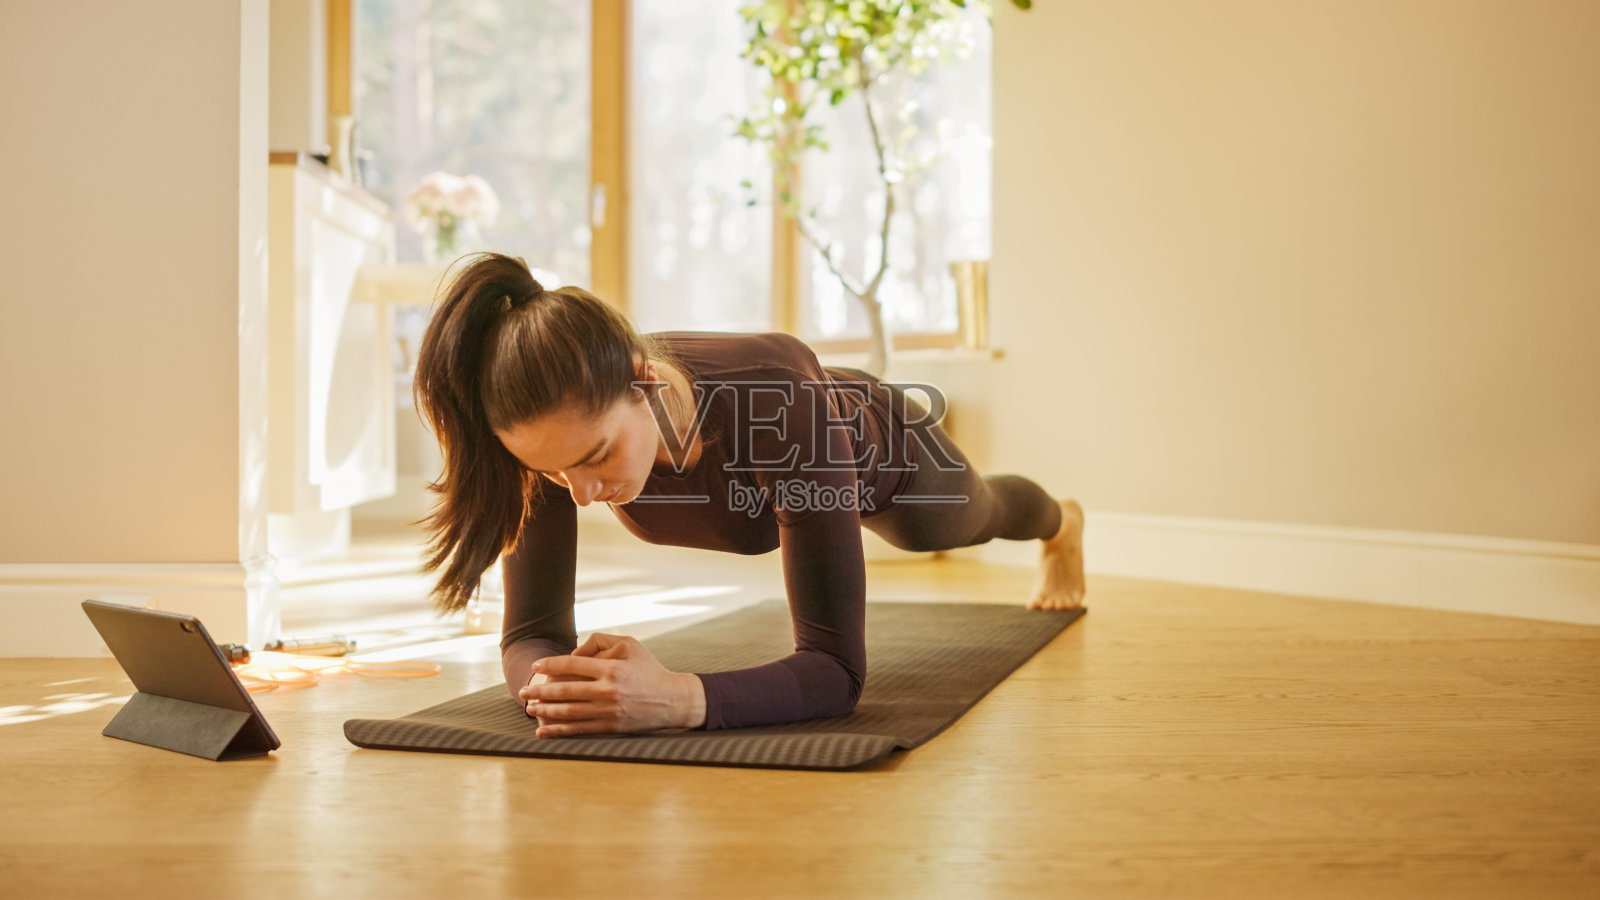 Strong Beautiful Fitness Girl in Workout Clothes Does Stretching Yoga Exercises at Home, Uses Digital Tablet for Online Exercise, Workout, Streaming Fitness。在明亮的客厅里进行家庭运动照片摄影图片